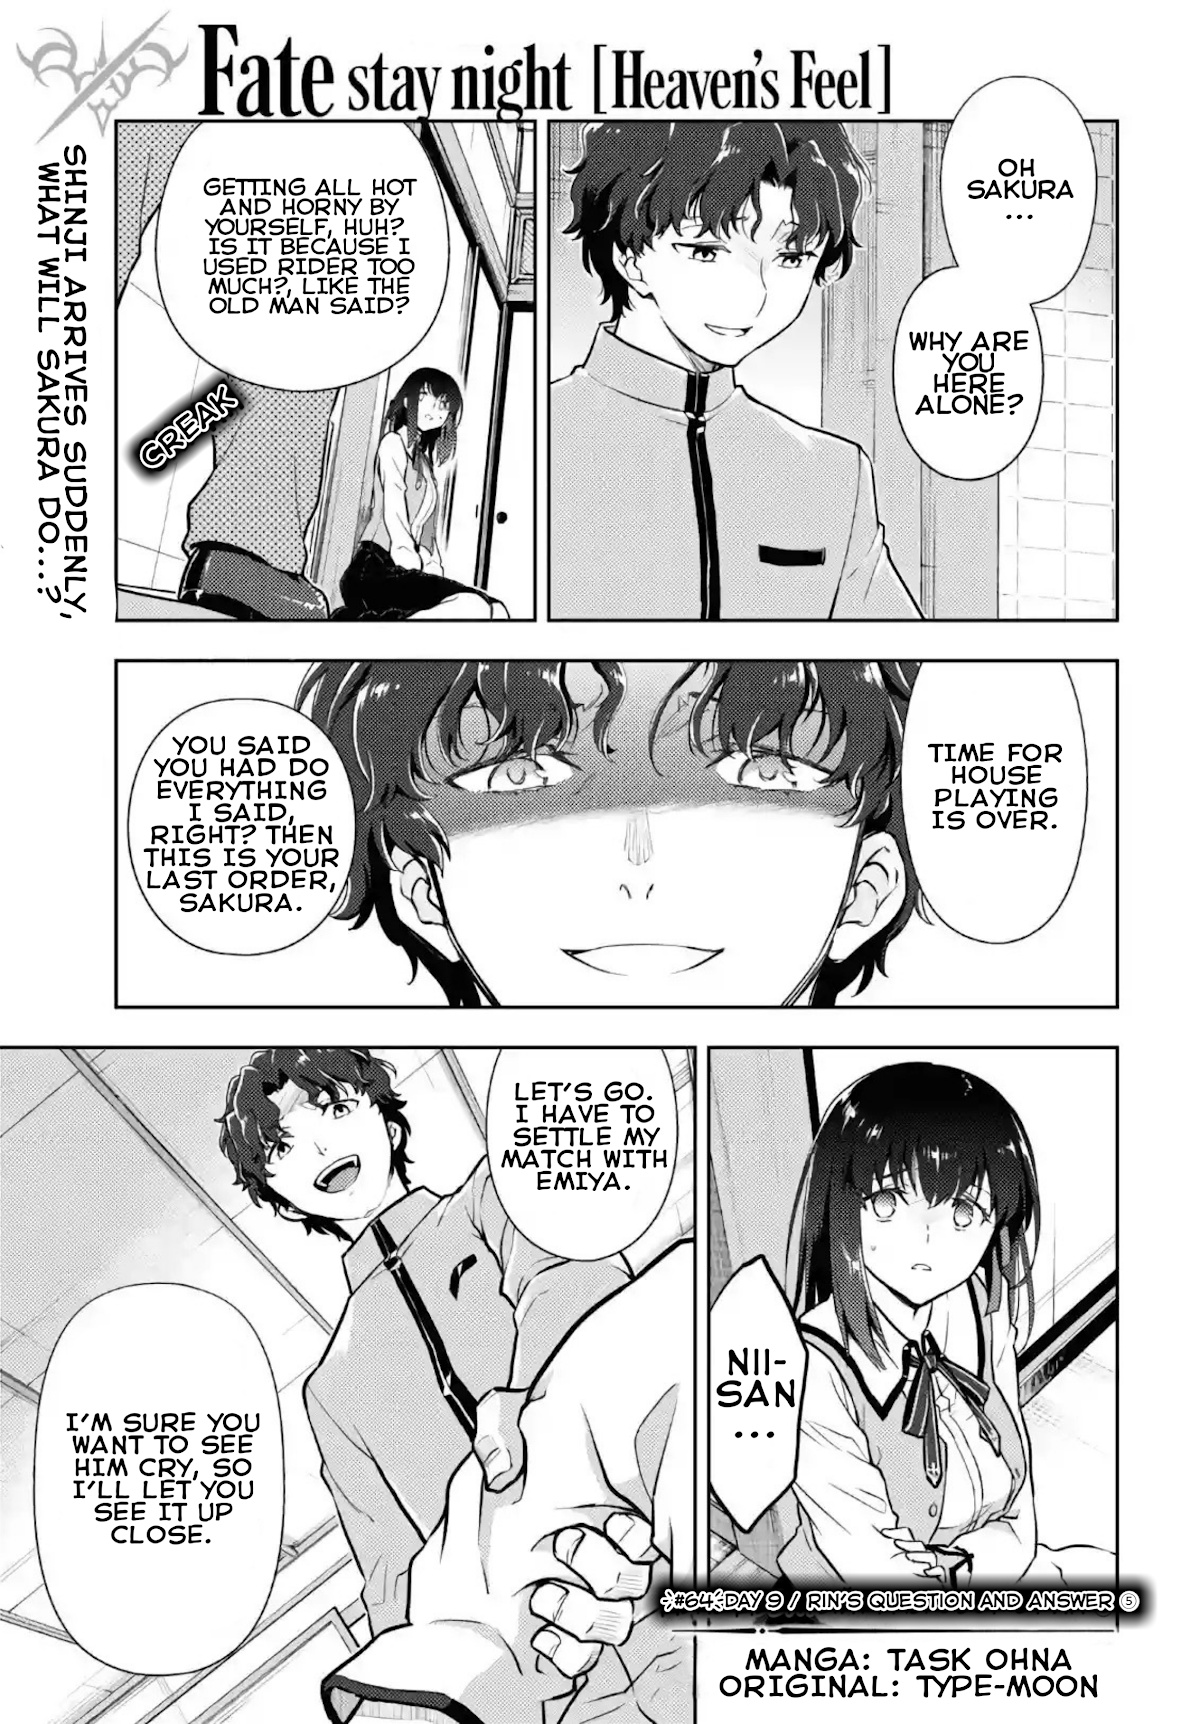 Fate/stay Night - Heaven's Feel Chapter 64: Day 9 / Rin's Questions And Answers (5) - Picture 1